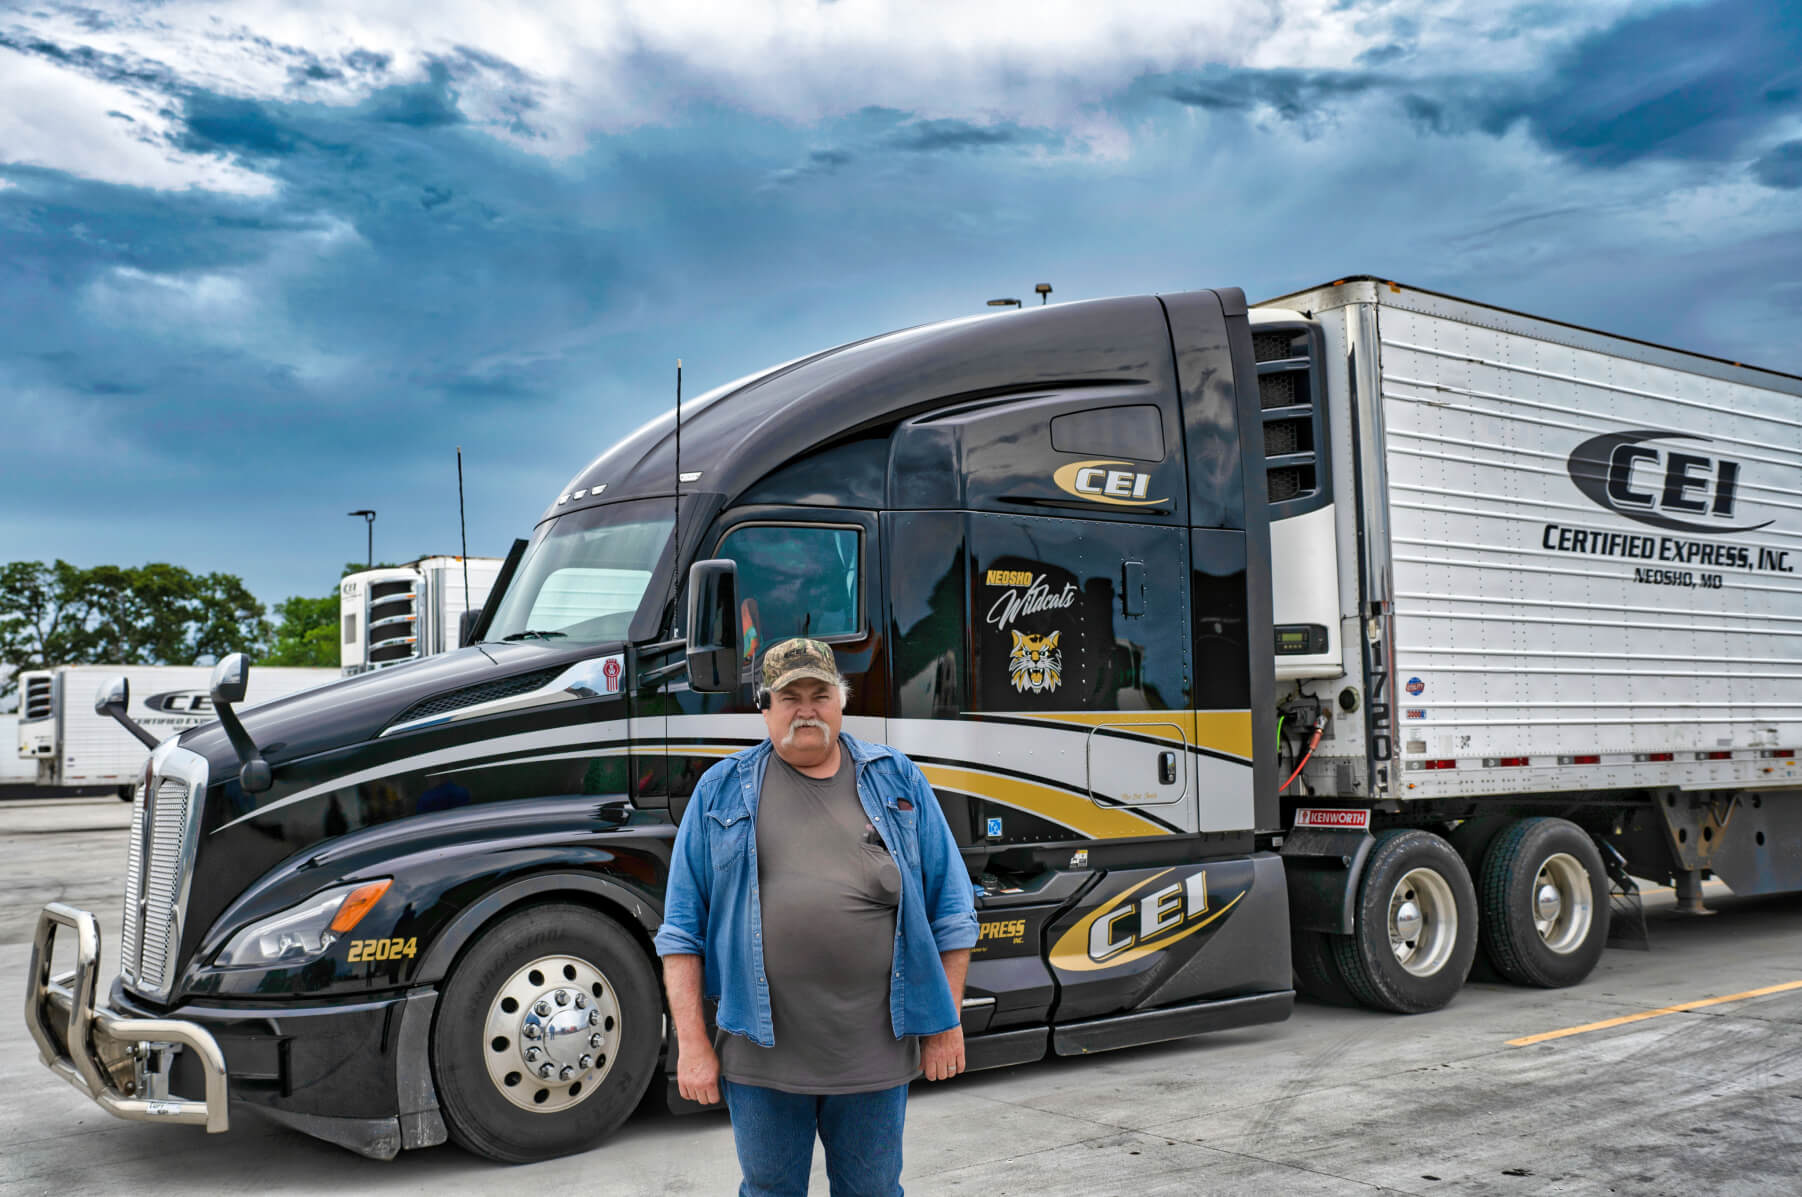 A CEI trucker stands in front of a black semi truck and trailer.